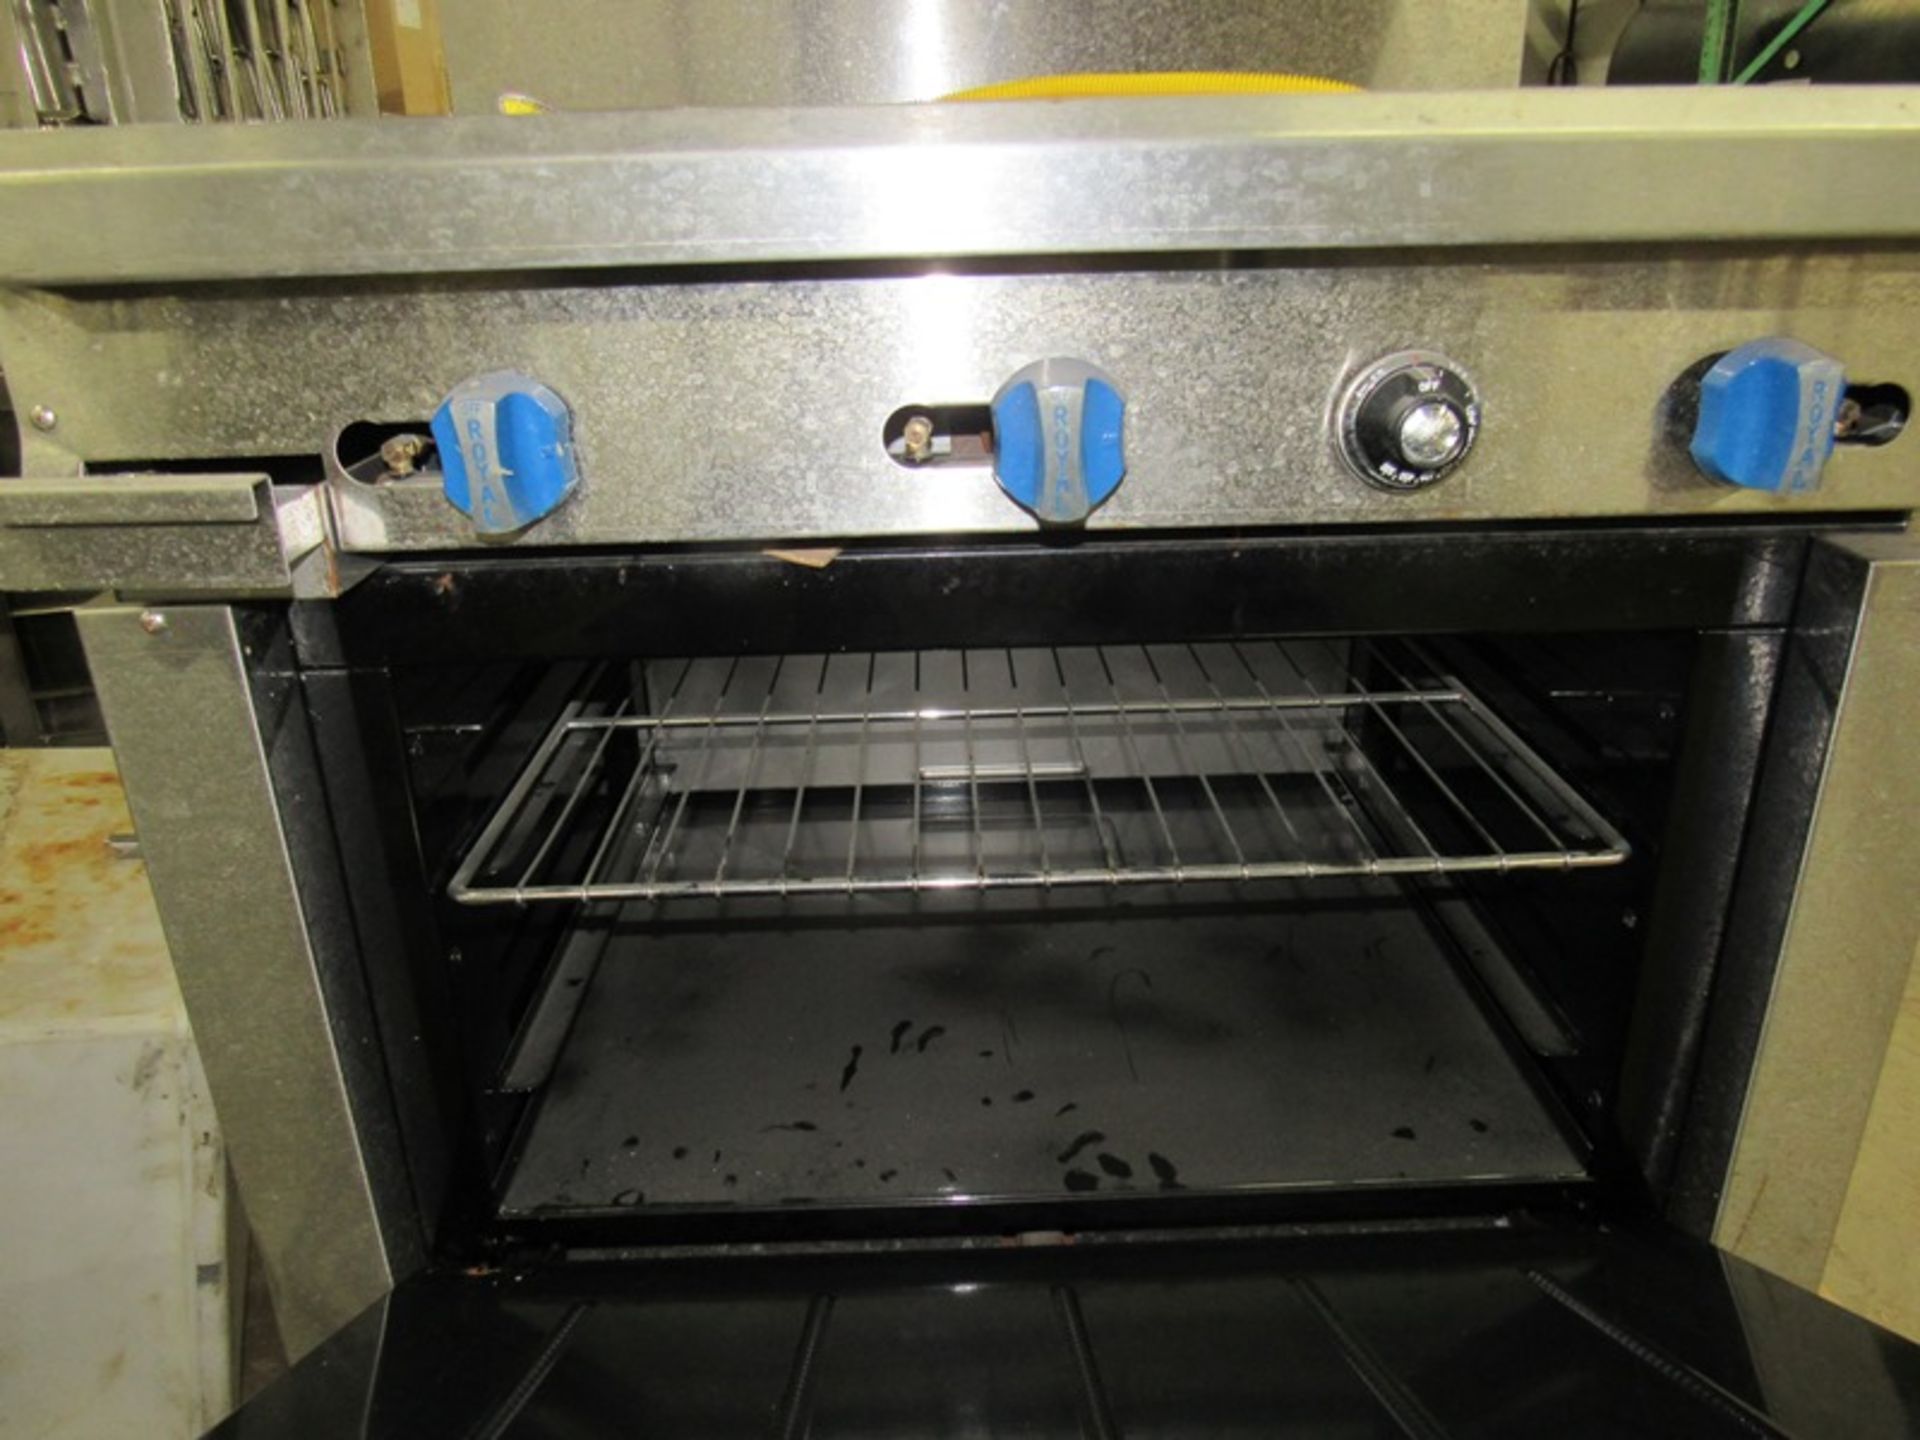 Royal Gas Fired Grill/Oven, 36" Wide X 21" Deep grill area ***All Monies must be received by Friday - Image 2 of 3